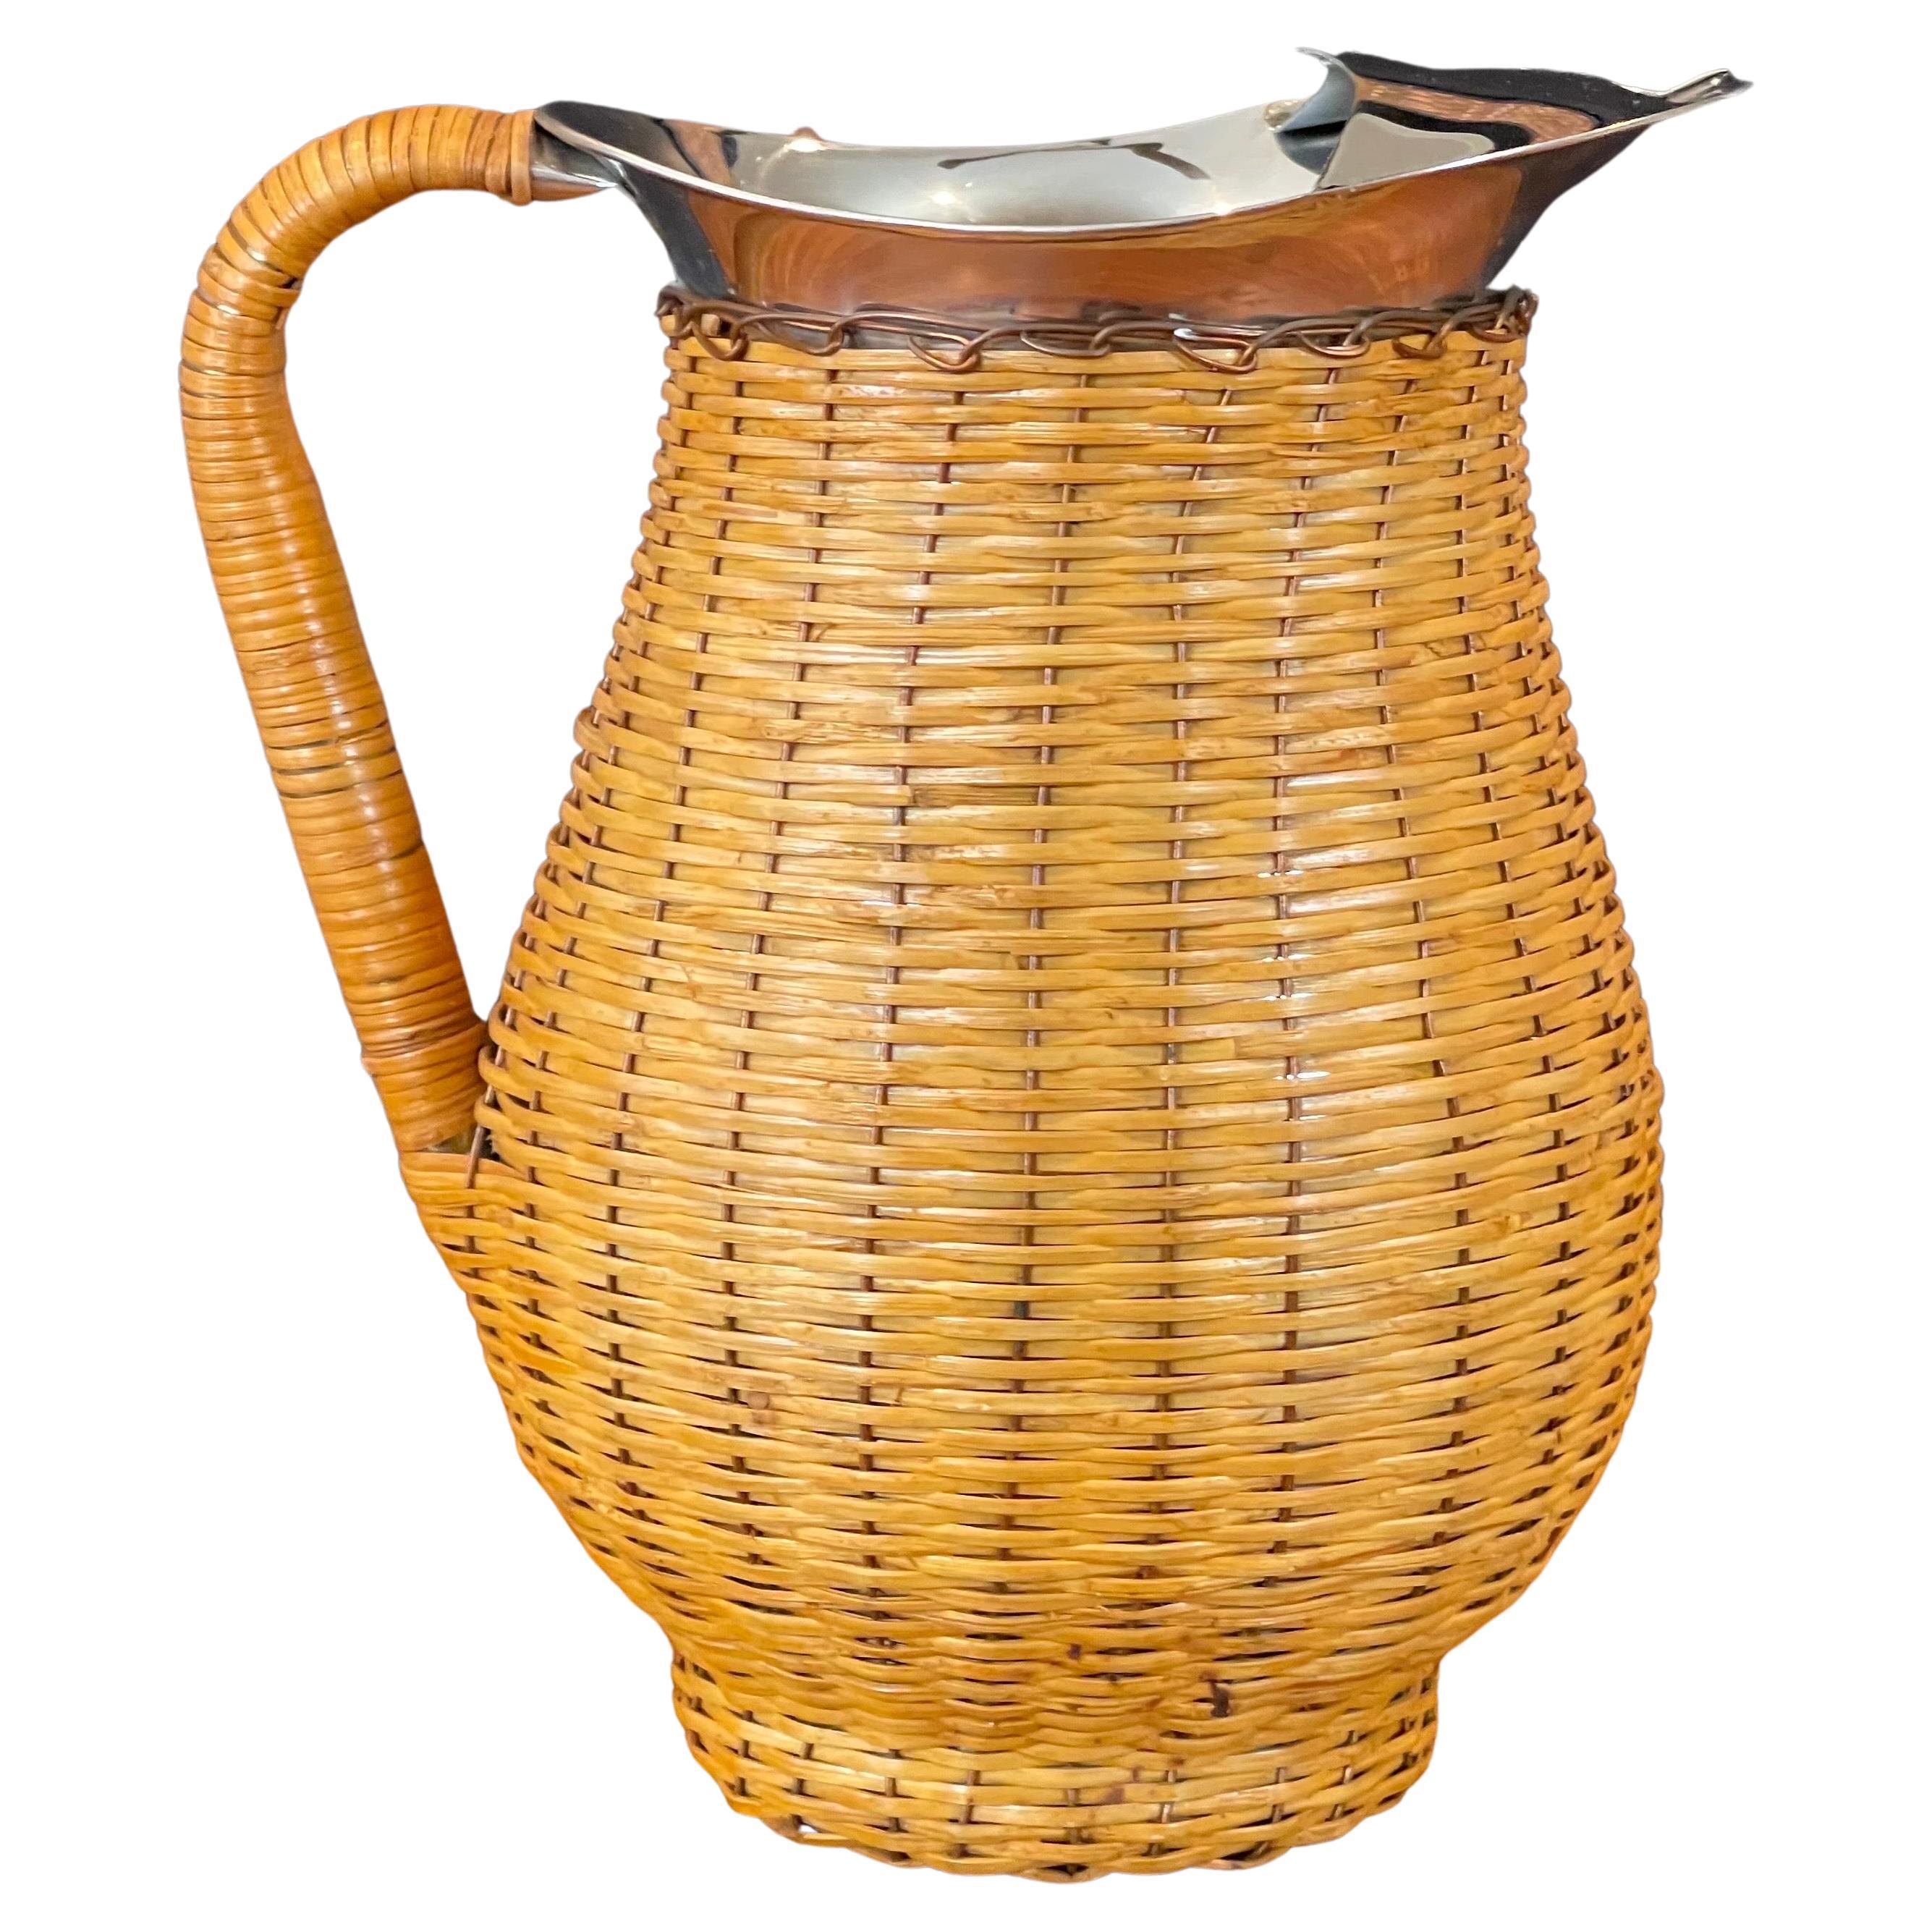 A really nice and well crafted MCM wicker wrapped stainless steel pitcher, circa 1970s. The piece is in good vintage condition and measures 8